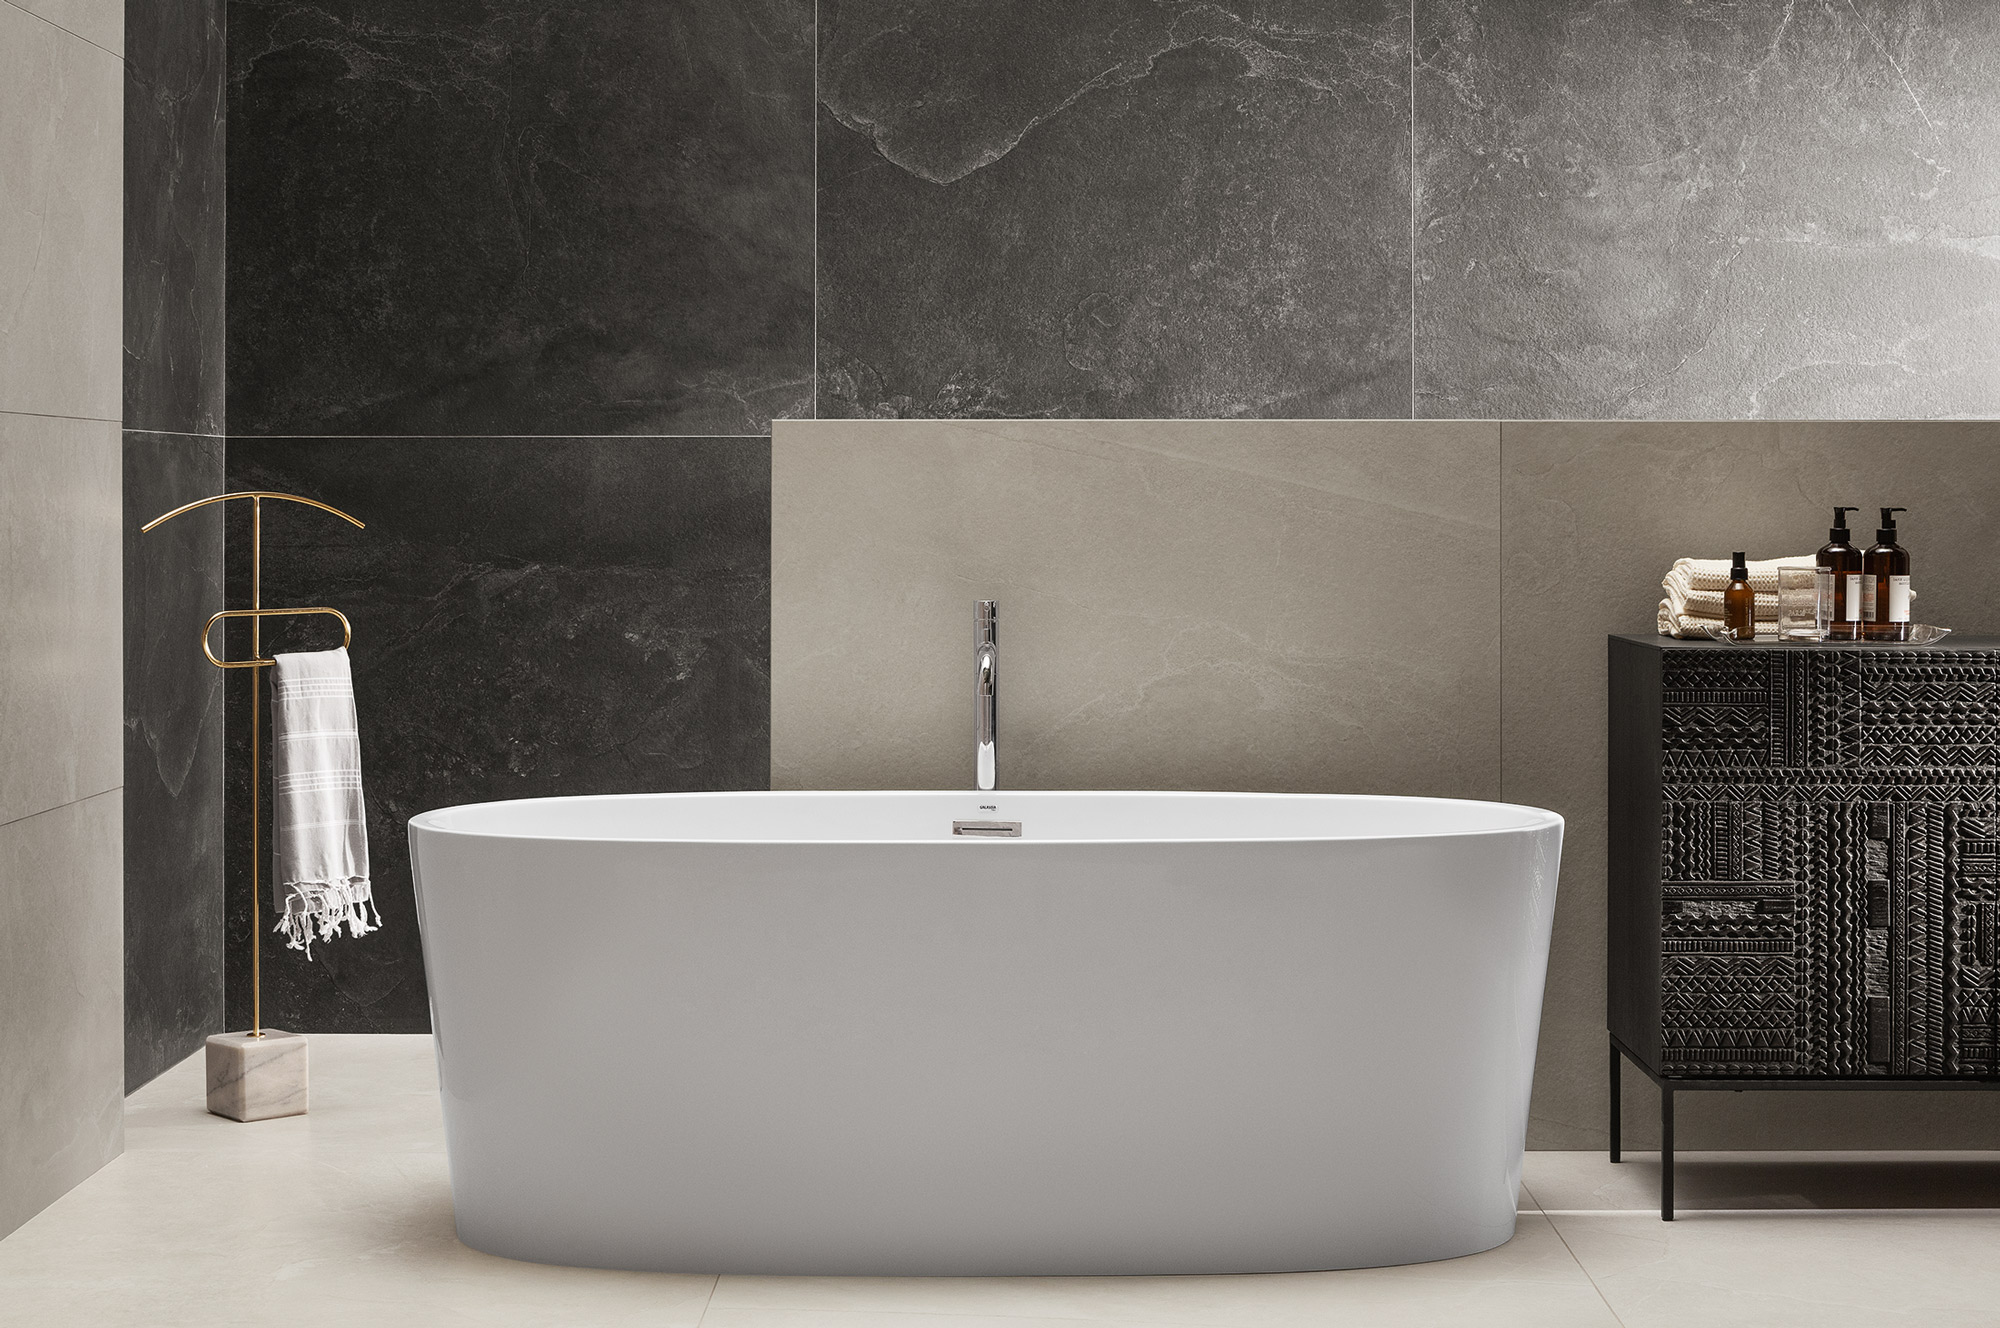 Porcelain Stone Tiles in a contemporary luxury bathroom - Grand Cave White & Graphite